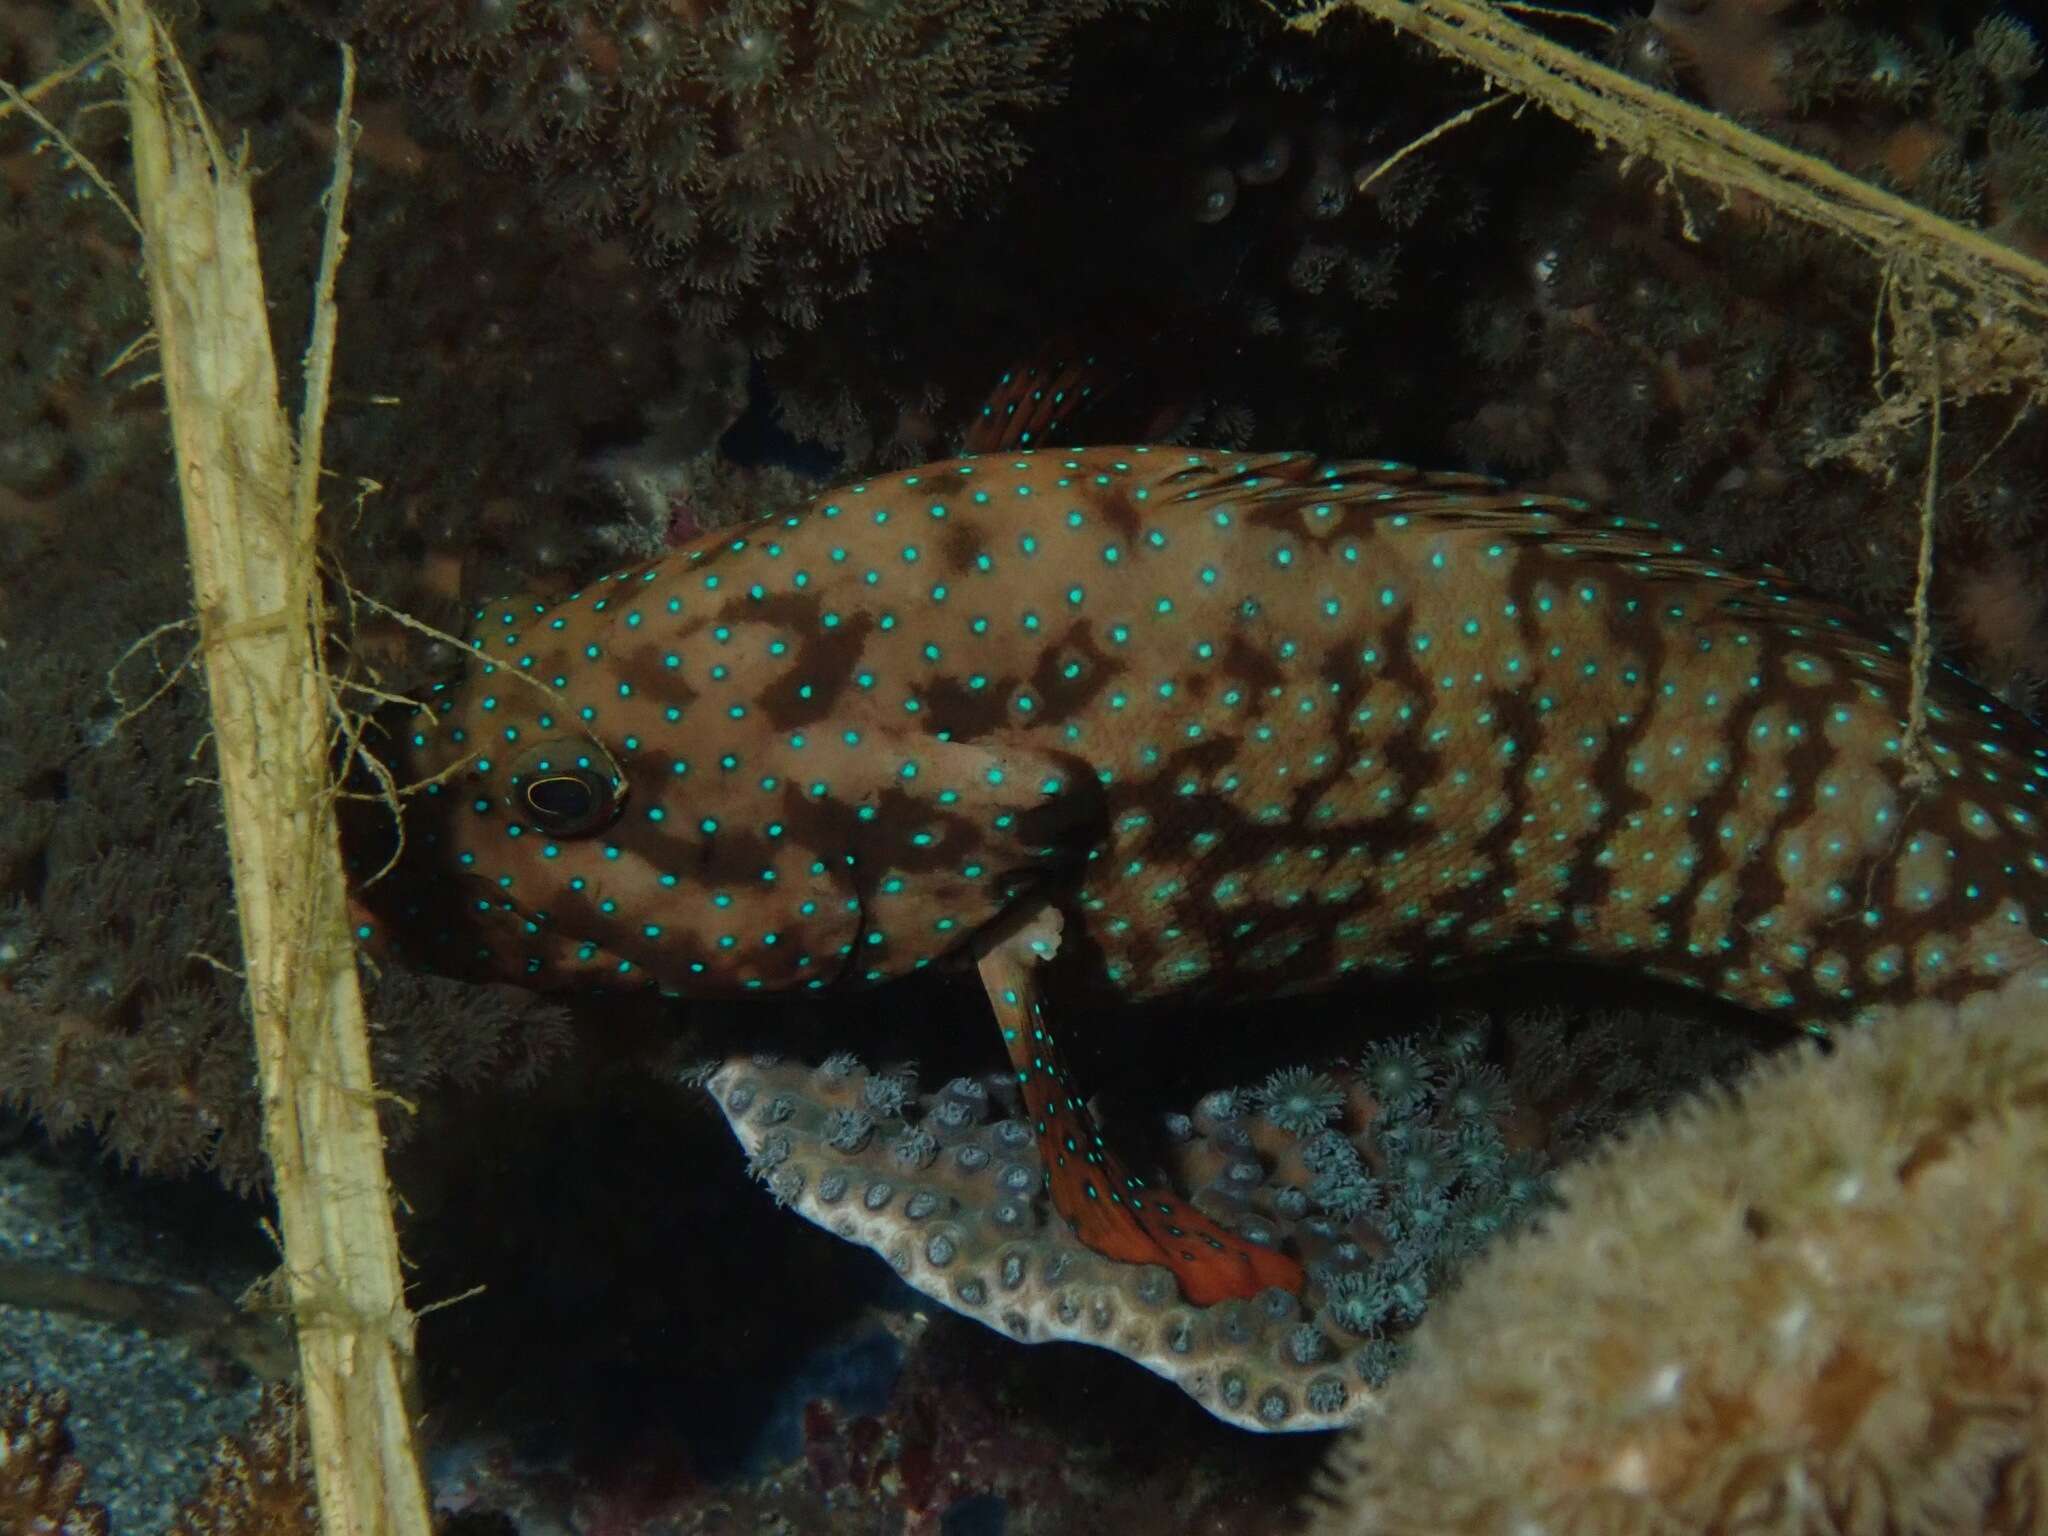 Image of Blue-spotted grouper